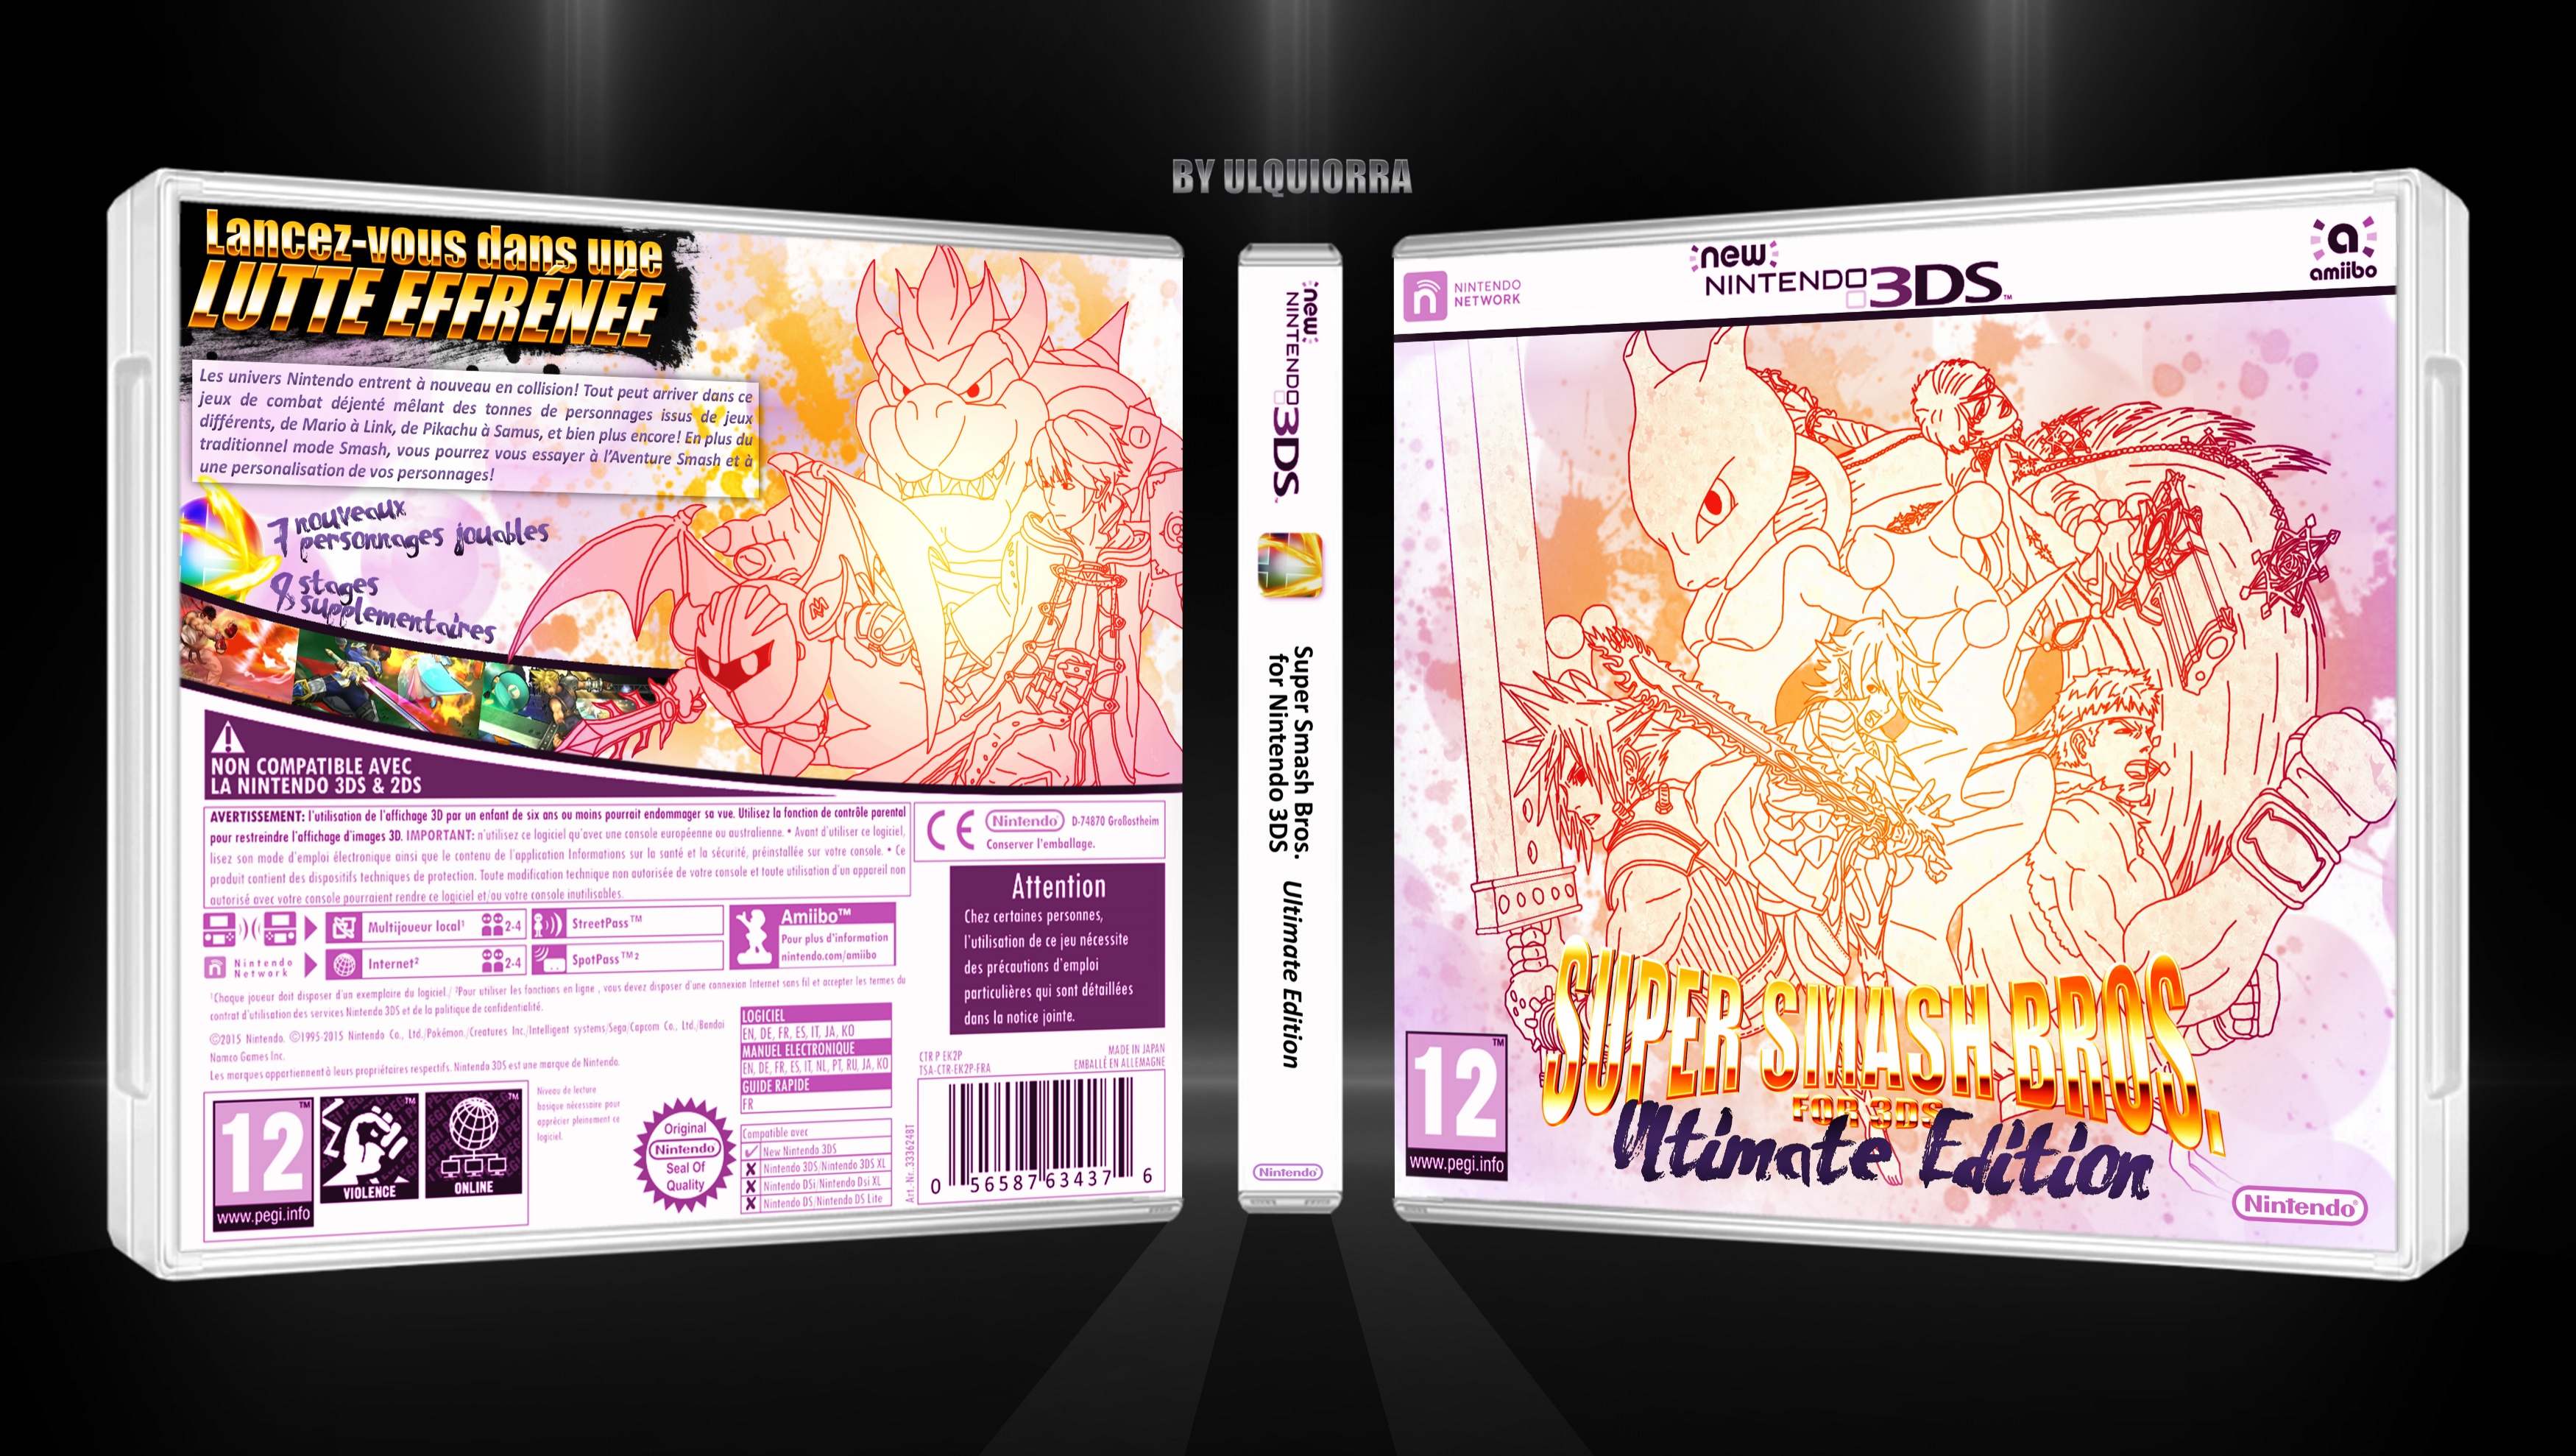 Super Smash Bros. for 3DS: Ultimate Edition box cover